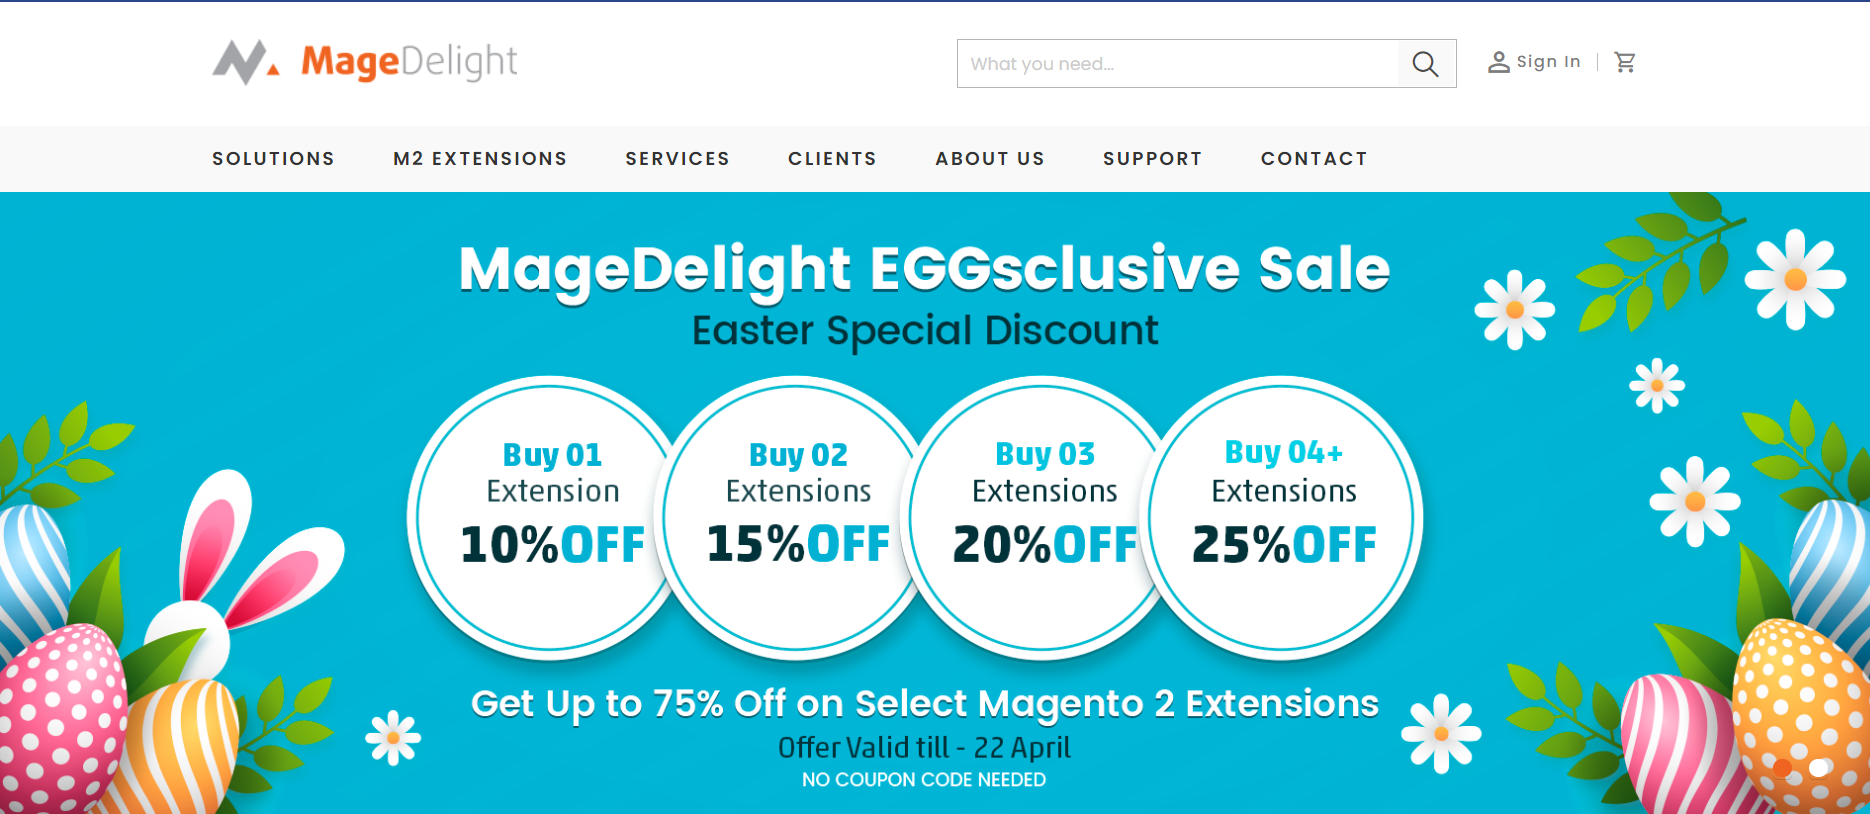 MageDelight - Magento migration company 